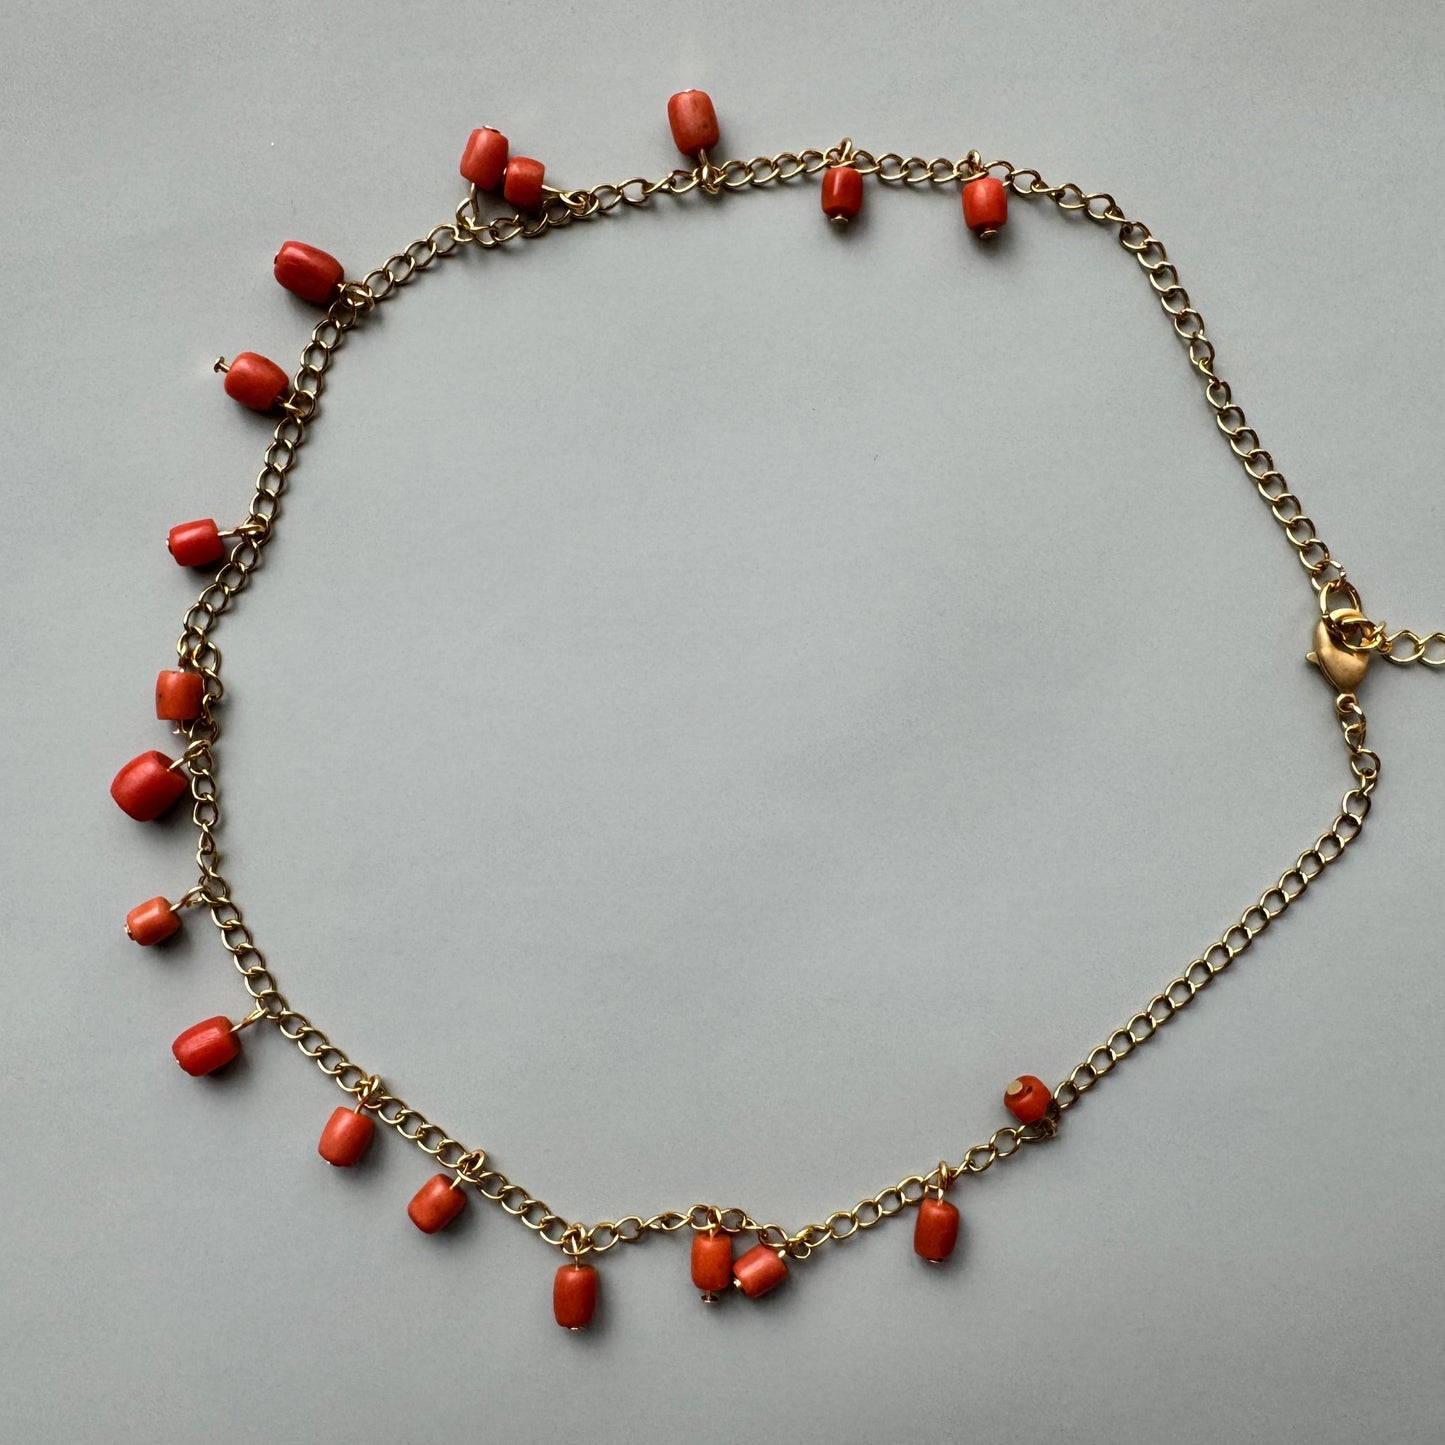 Delicate Dangly Coral Beads on Gold Chain Necklace